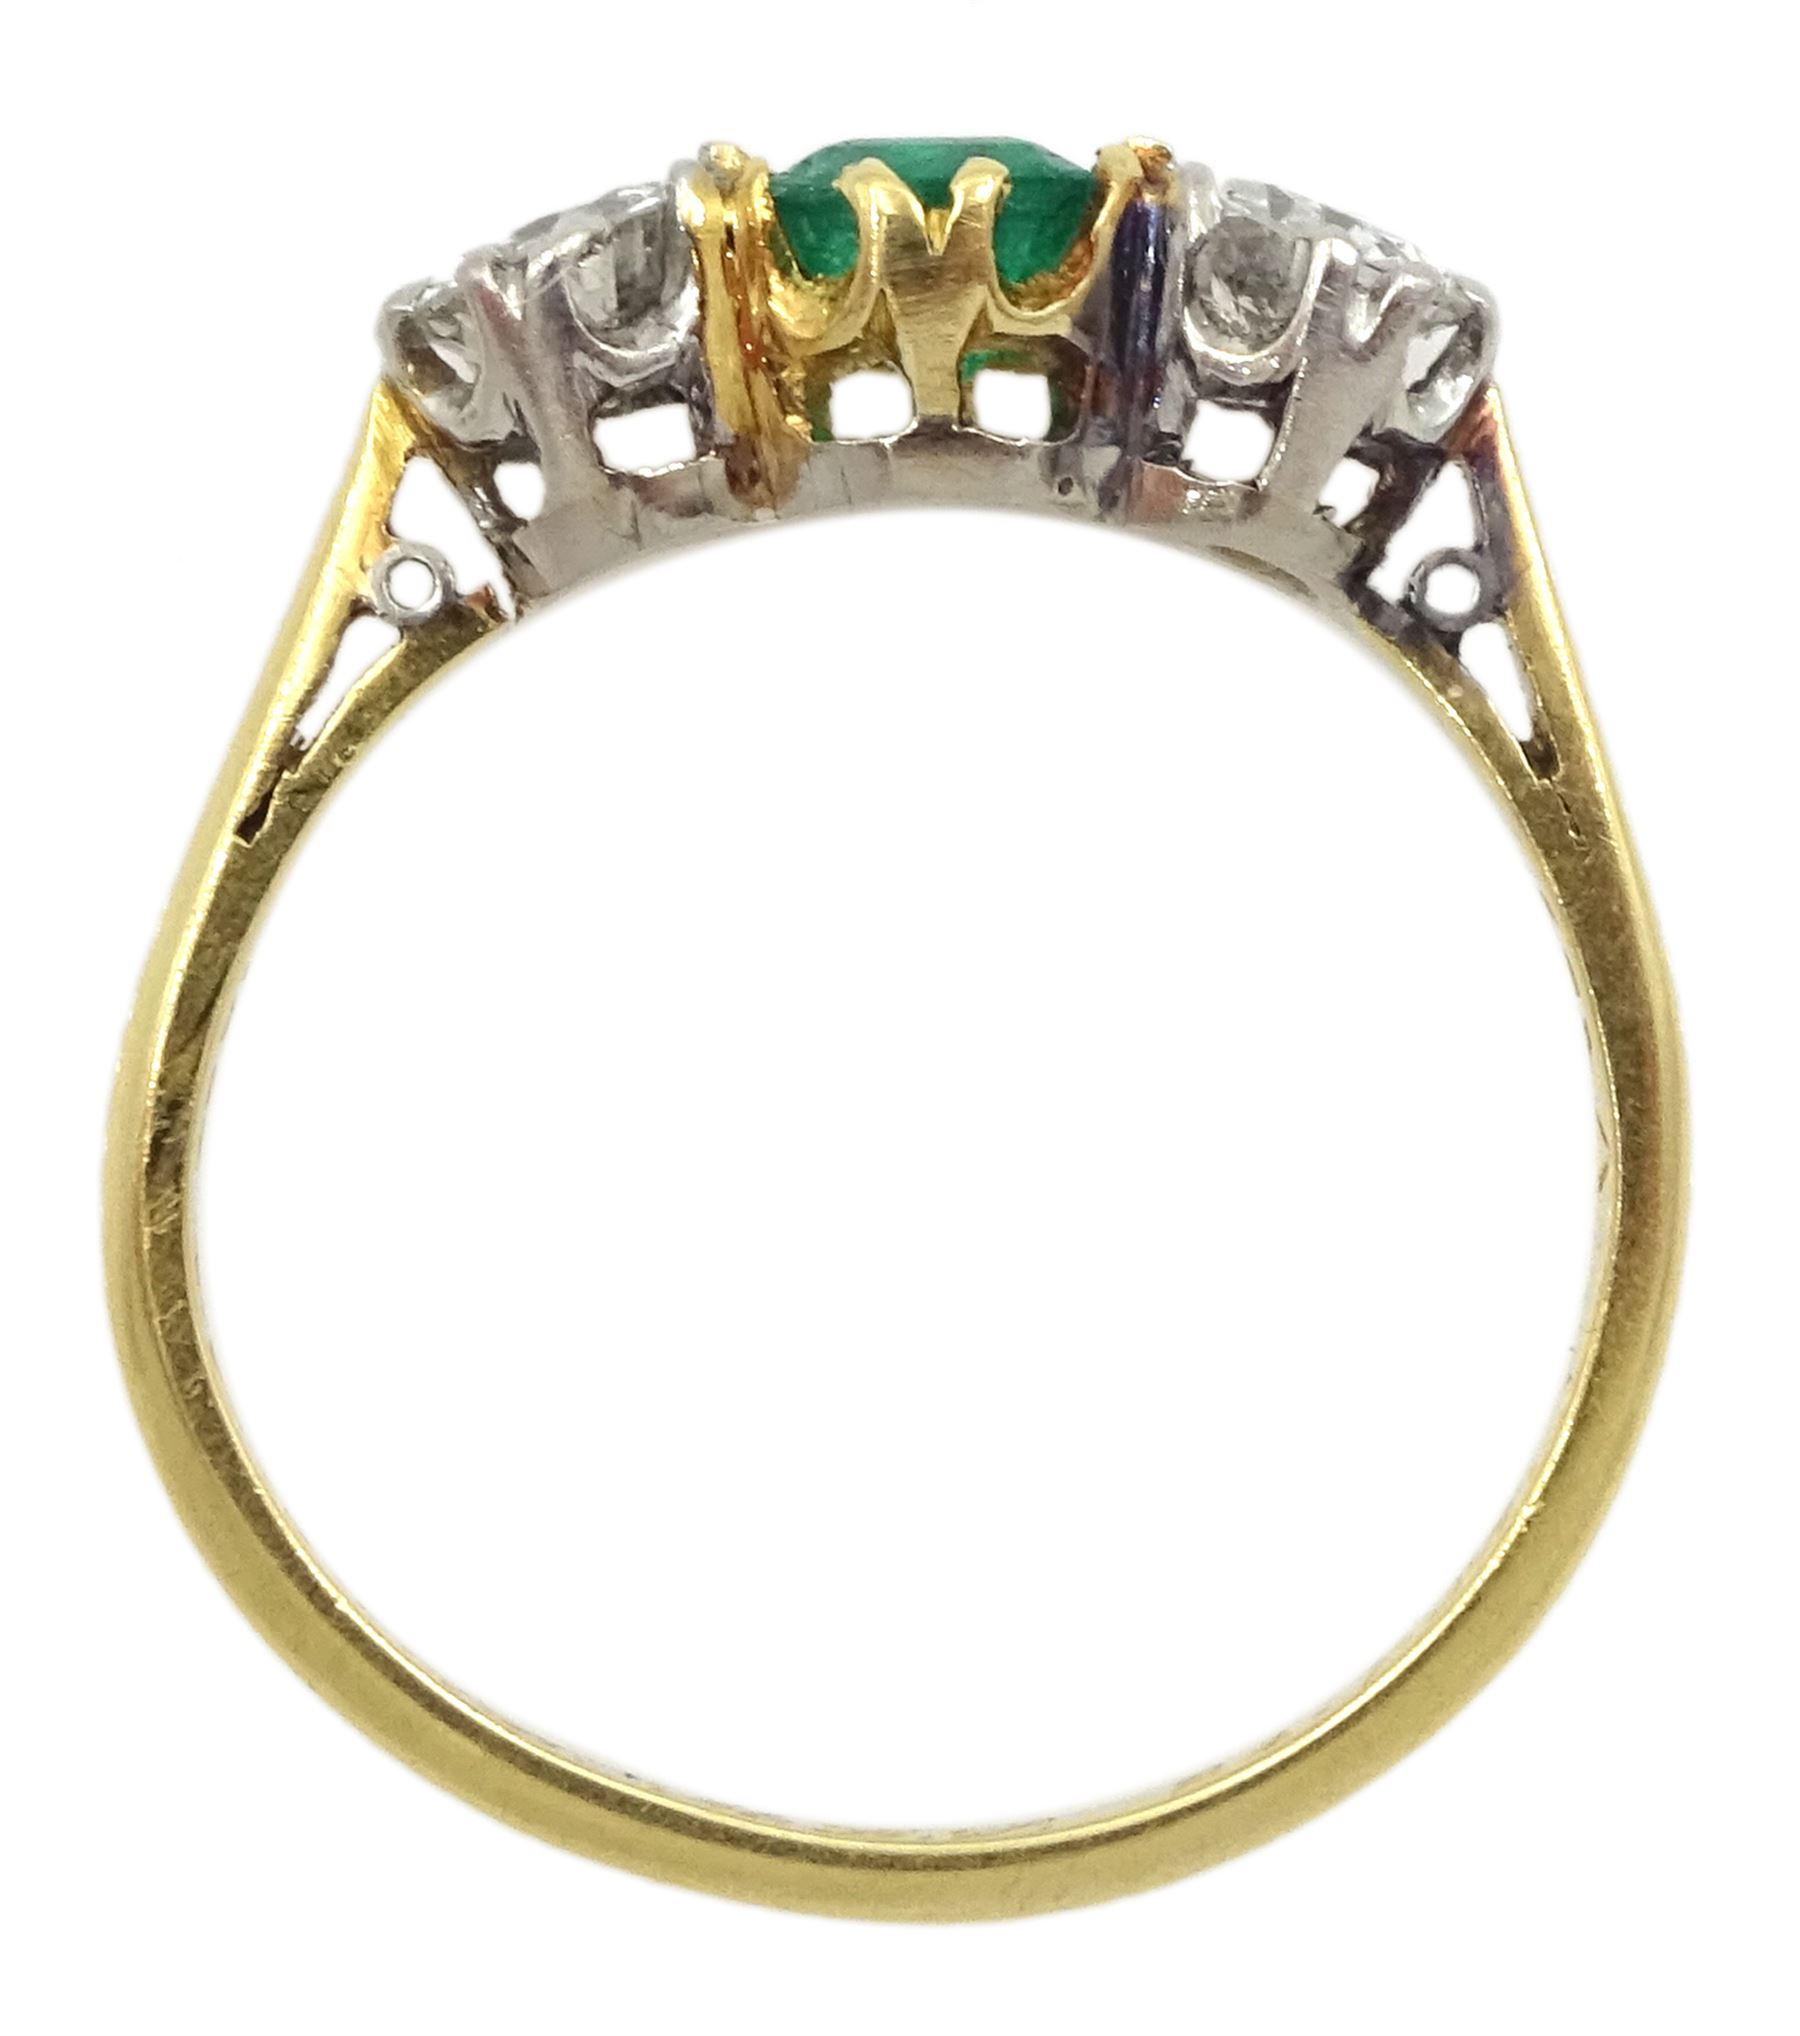 Early 20th century gold three stone old cut diamond and emerald ring - Image 4 of 7